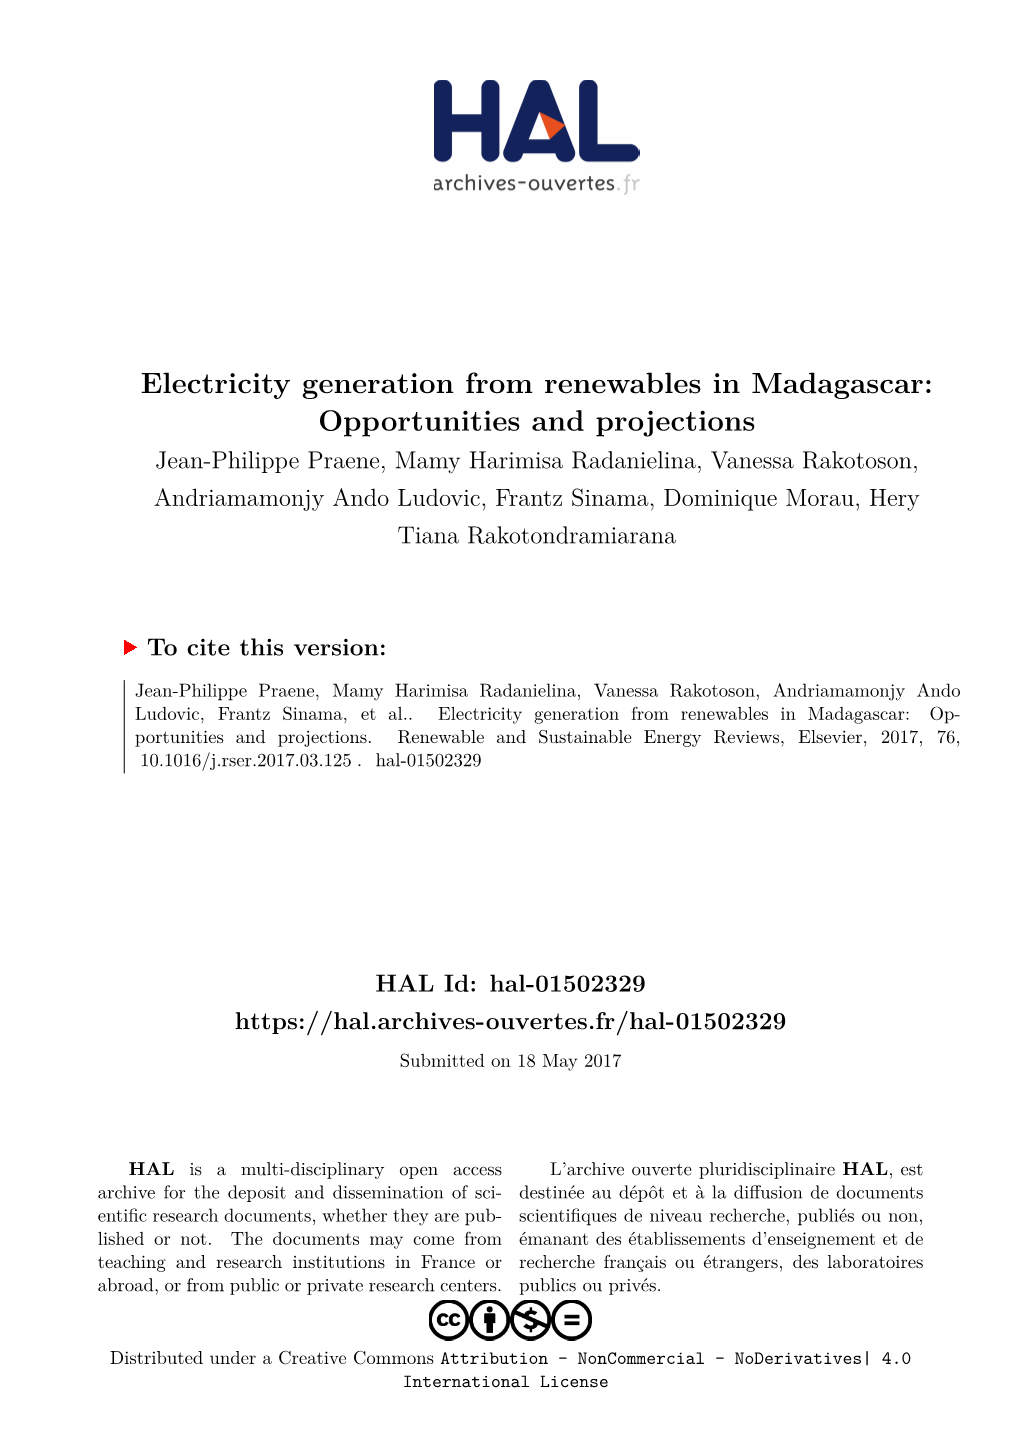 Electricity Generation from Renewables in Madagascar: Opportunities and Projections